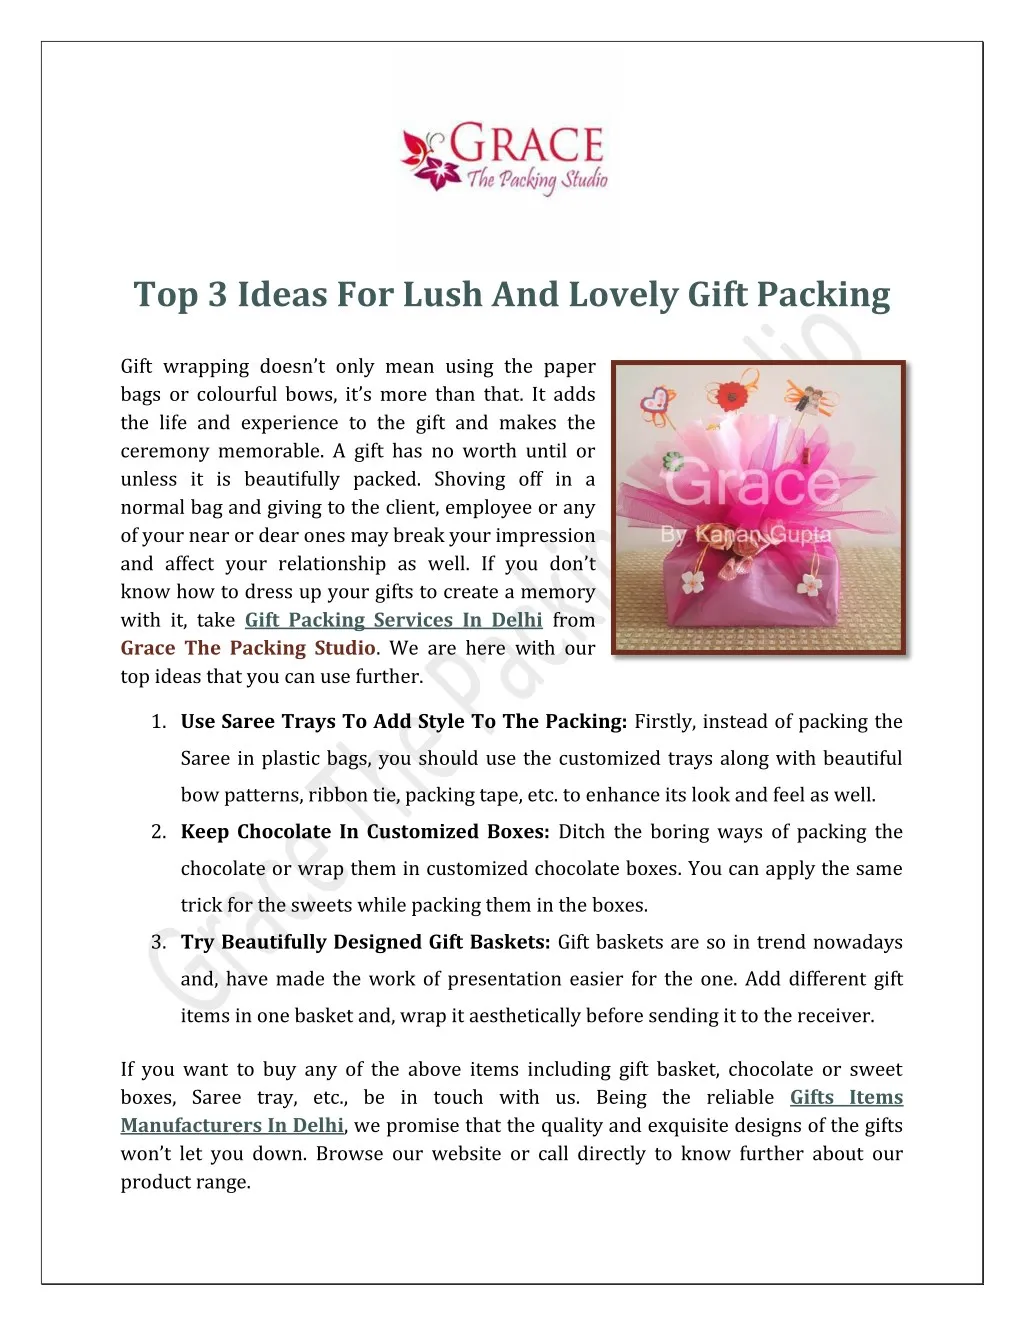 top 3 ideas for lush and lovely gift packing n.